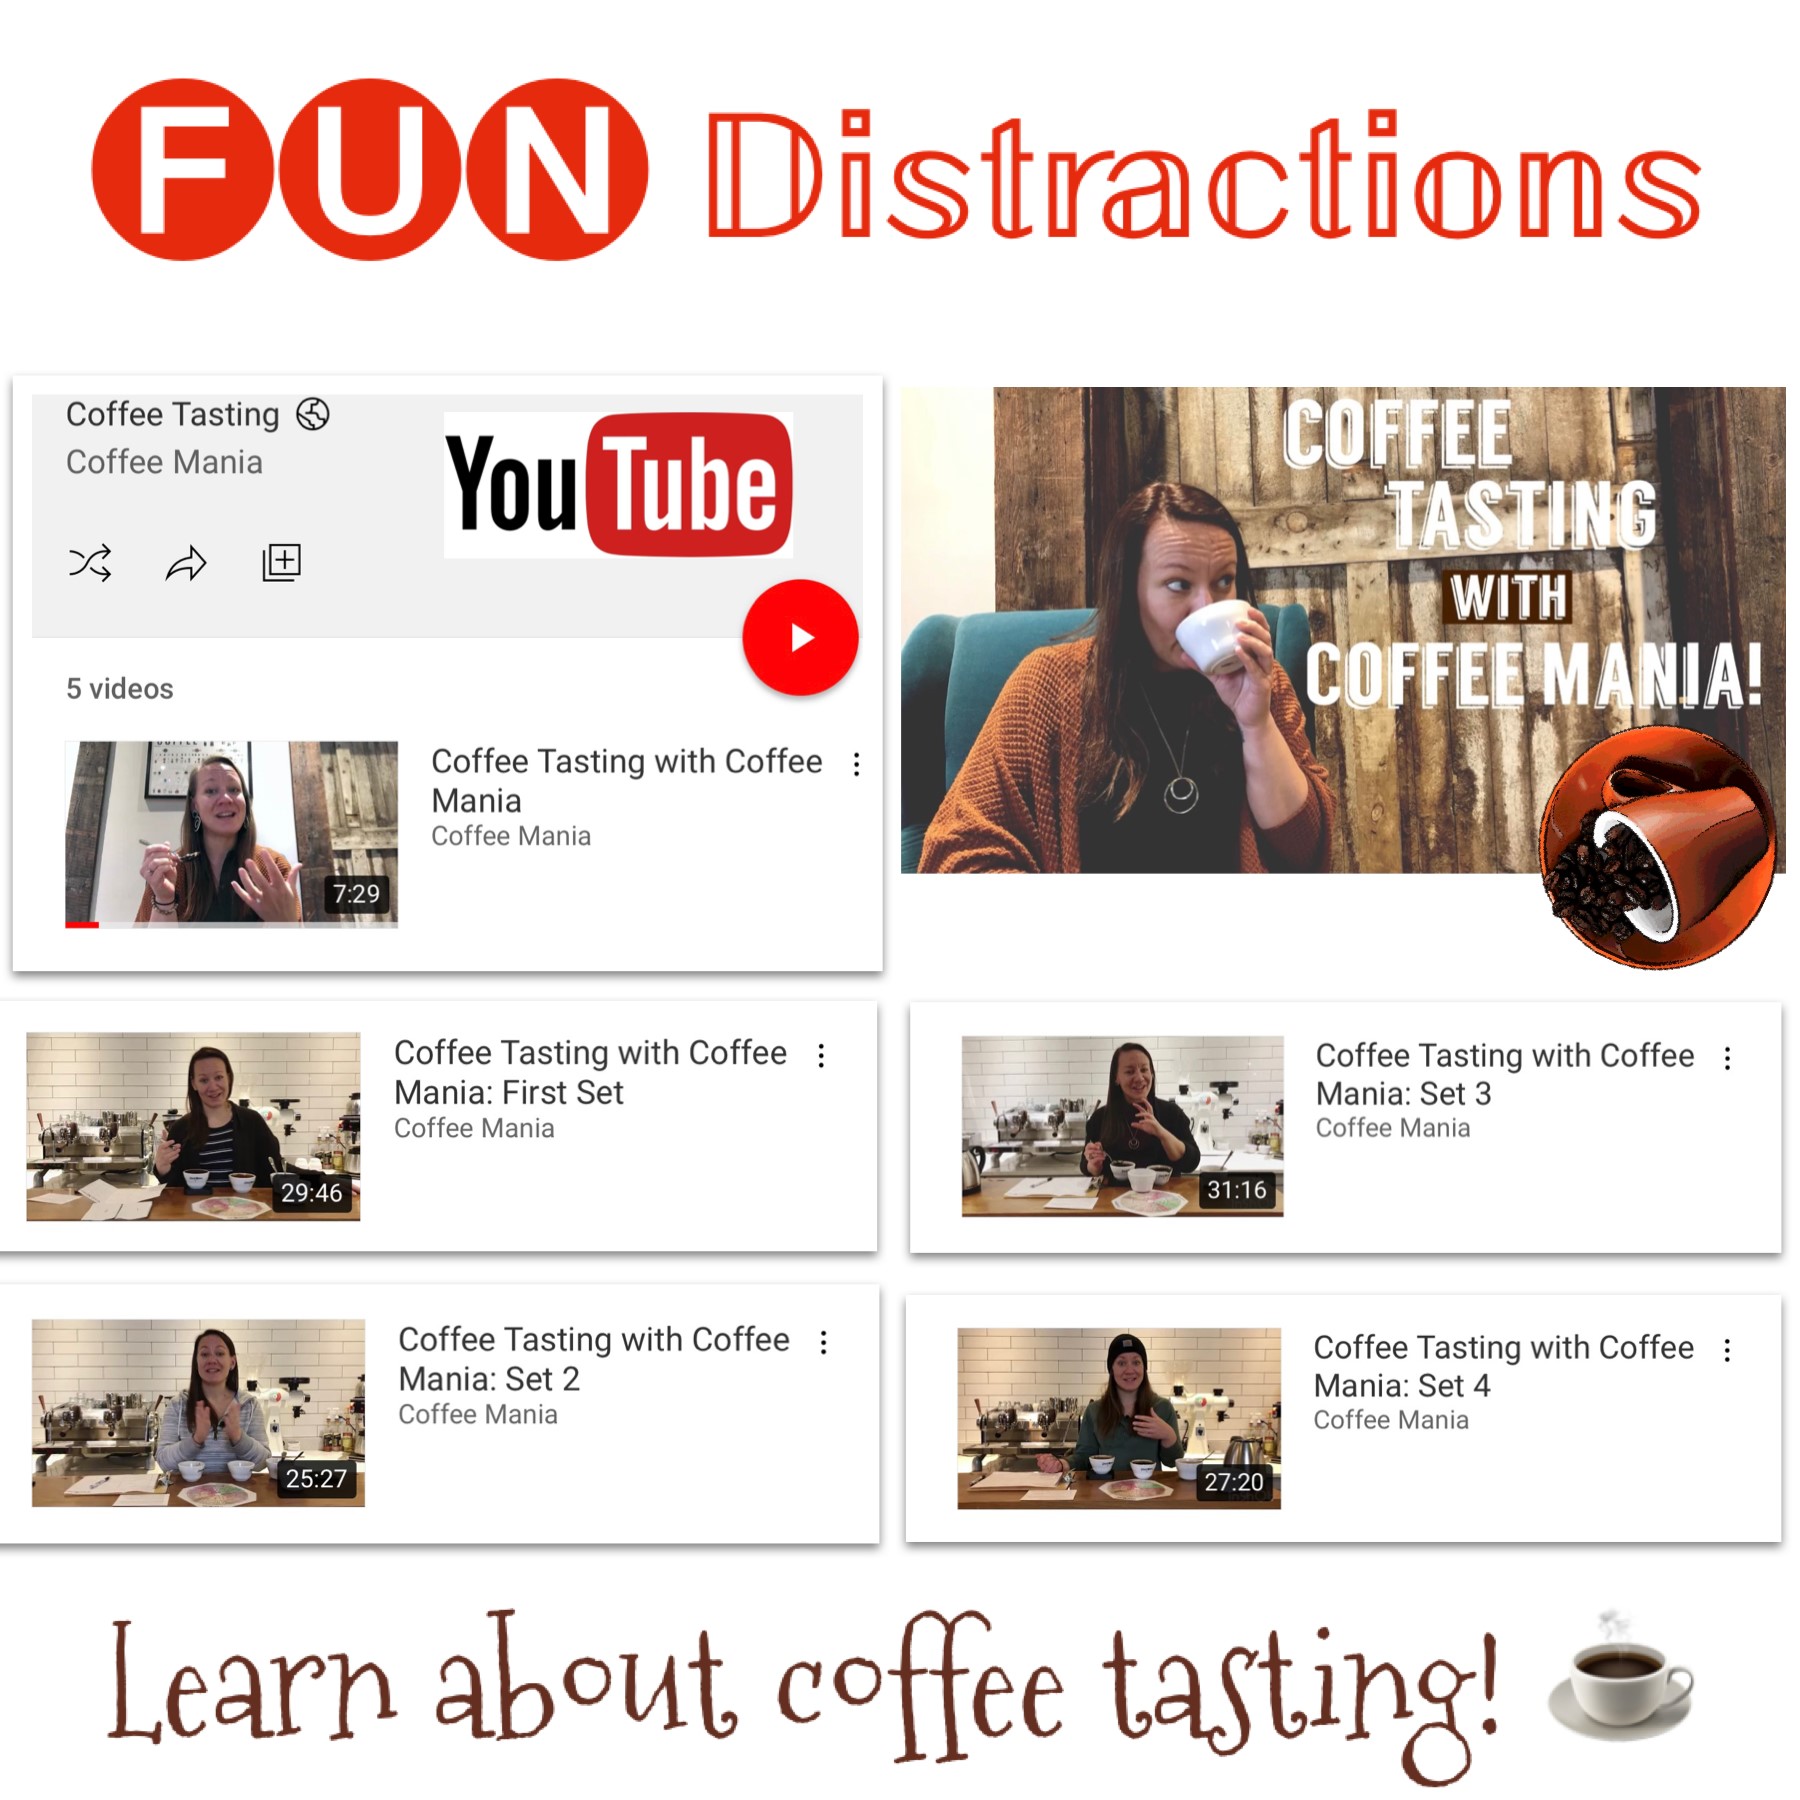 Images of Coffee Tasting videos from Youtube